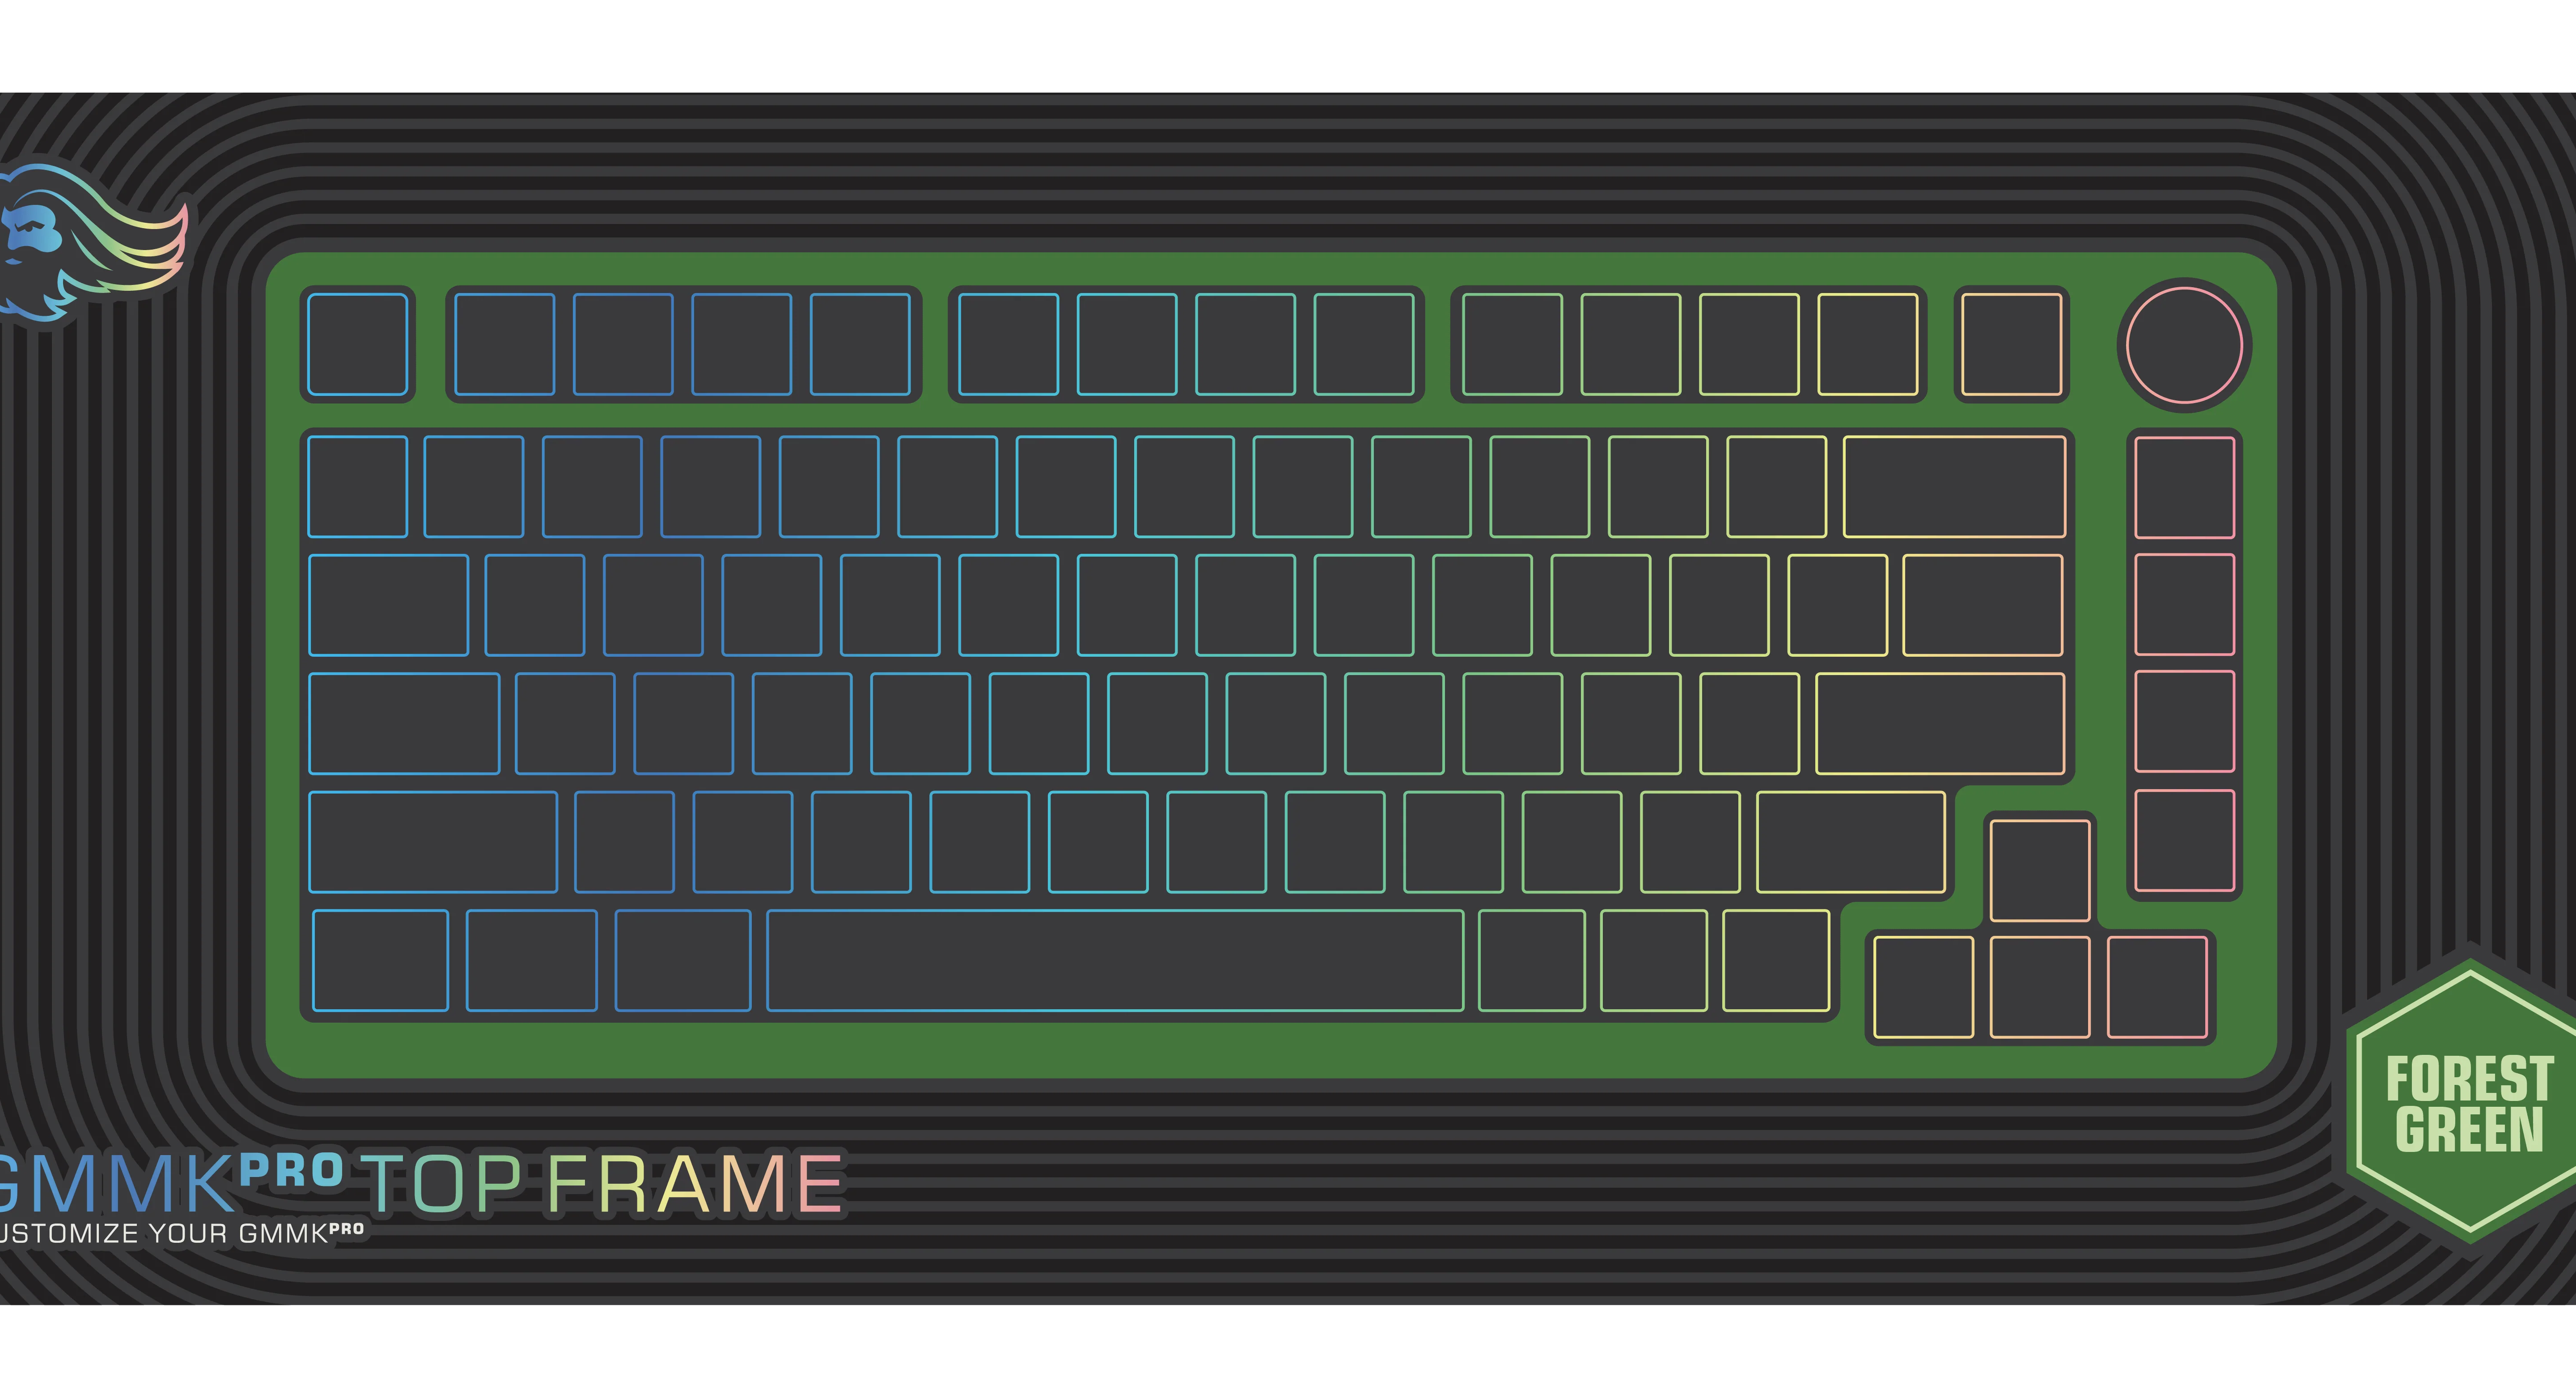 Glorious GMMK PRO 75% Alternative Top Frame - Forest Green